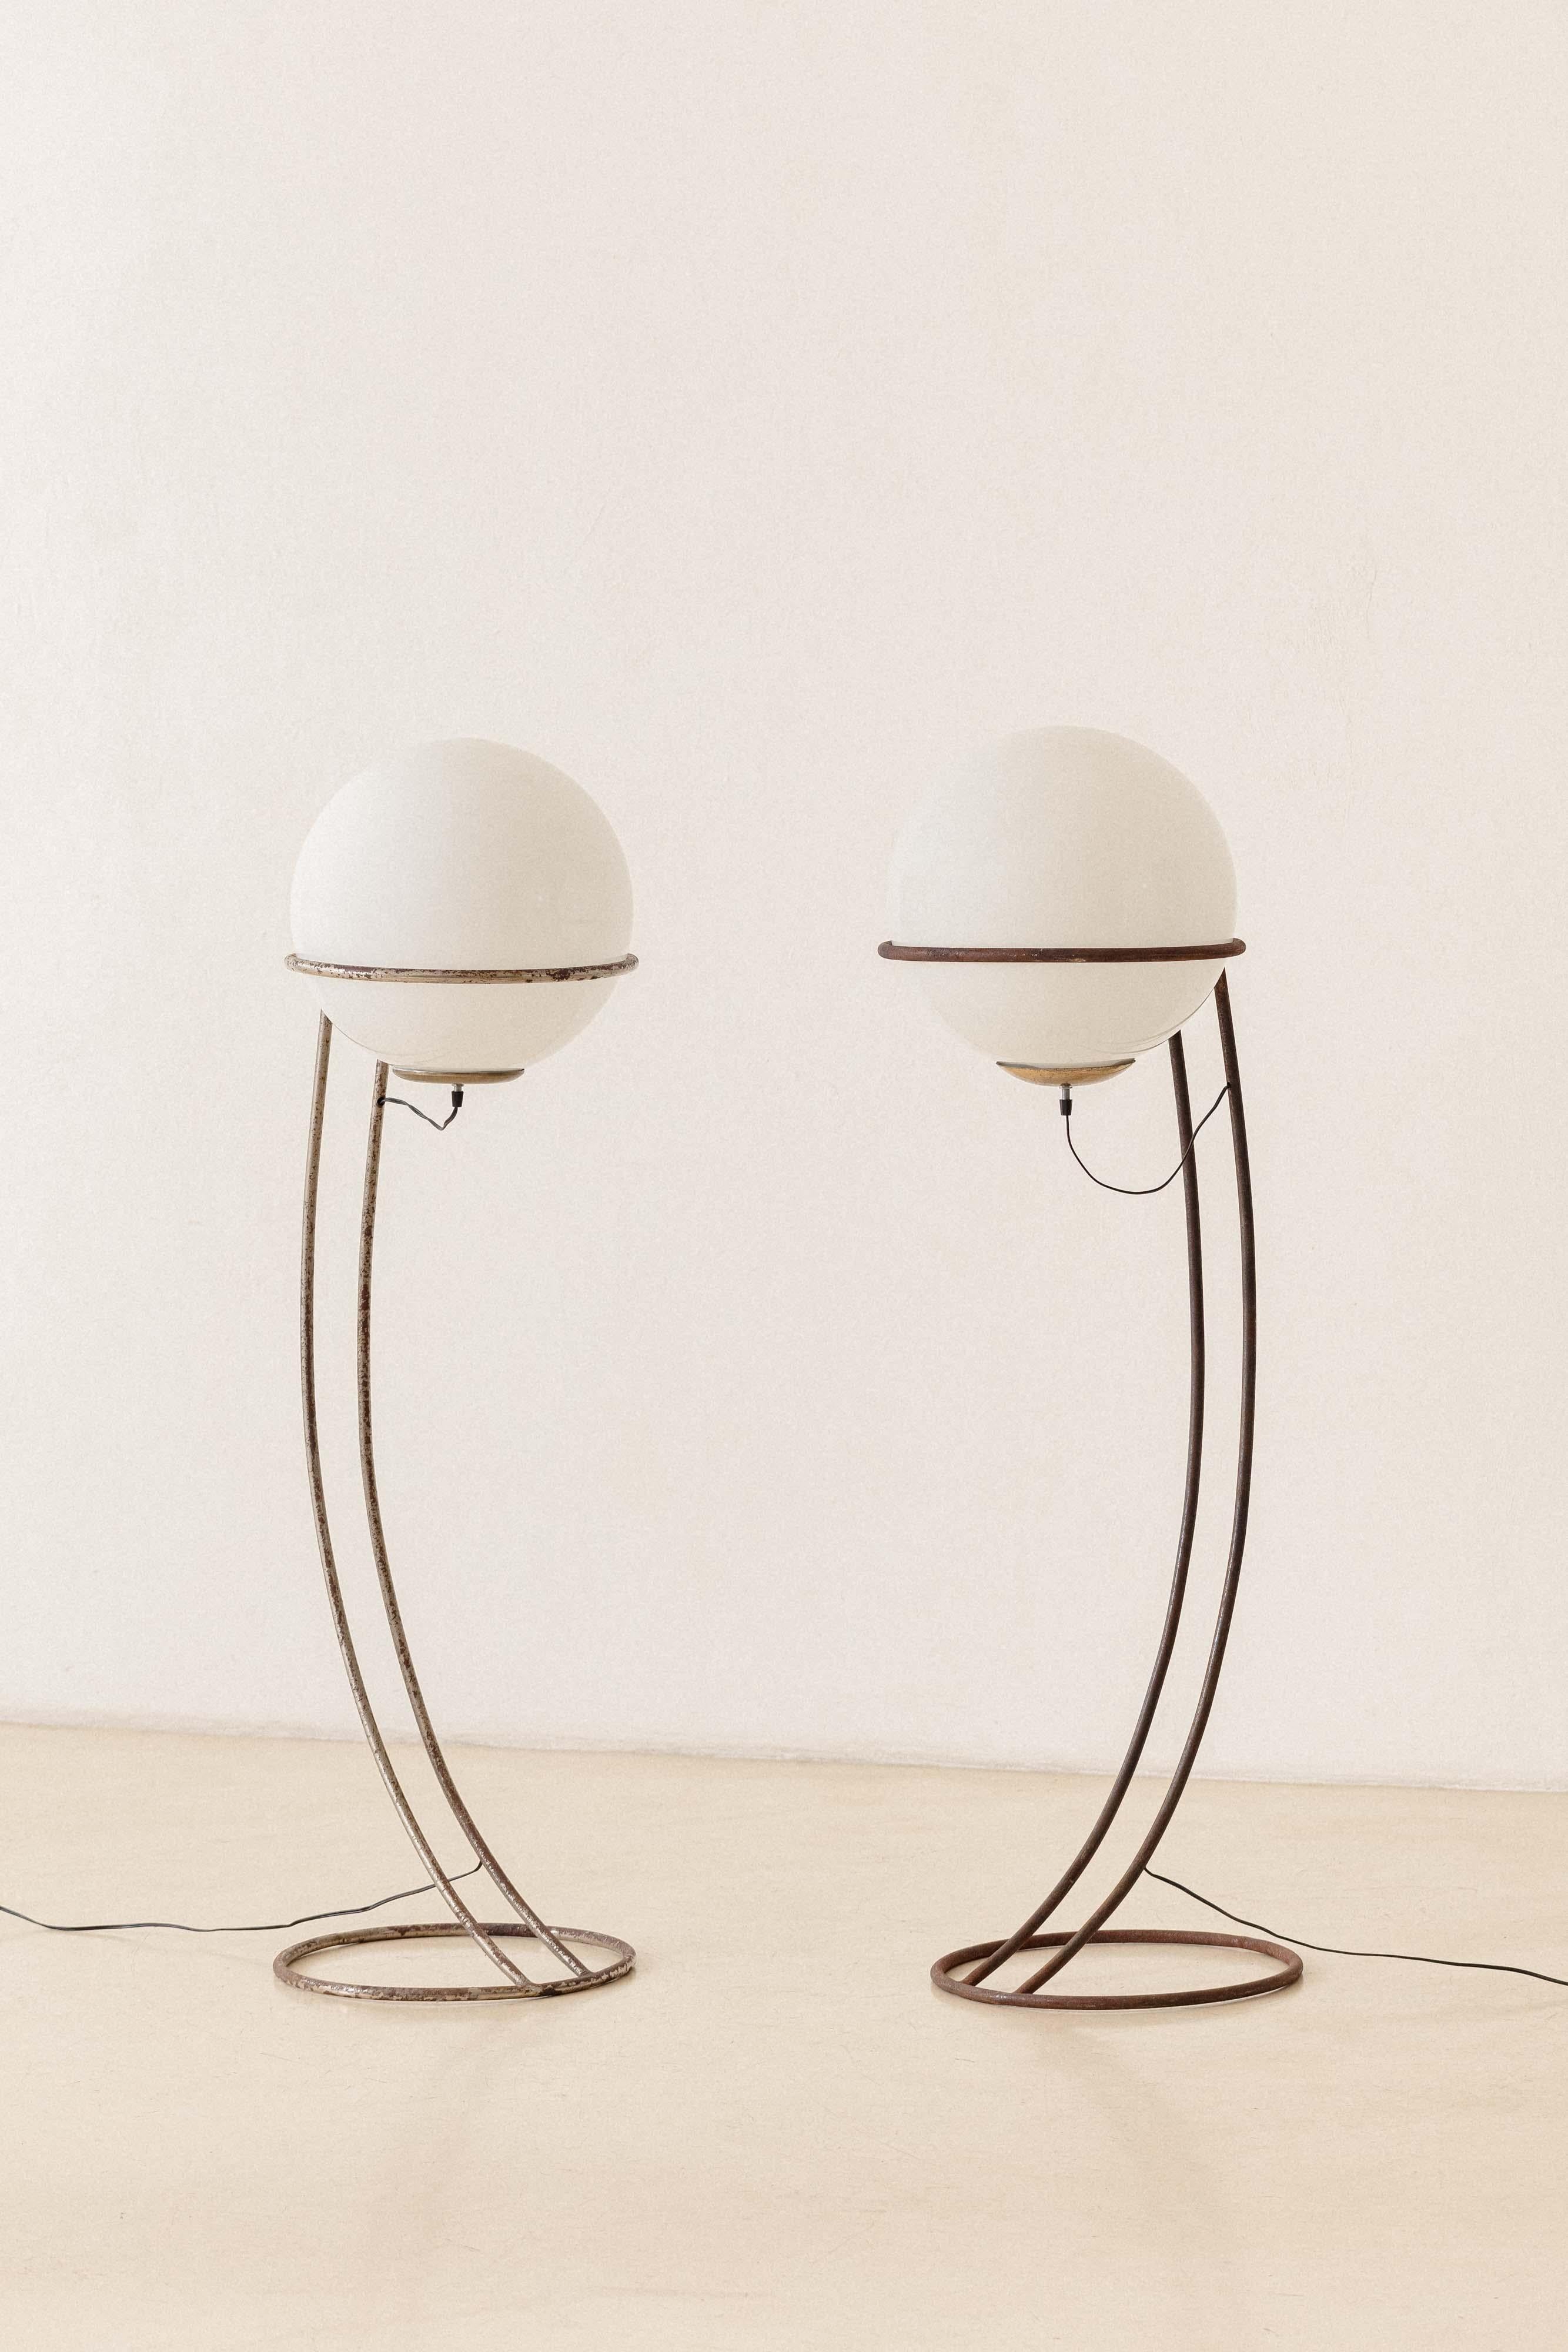 Metal Pair of Italian Floor Lamps by Unknown Designer, 1950s, Gino Sarfatti Style For Sale